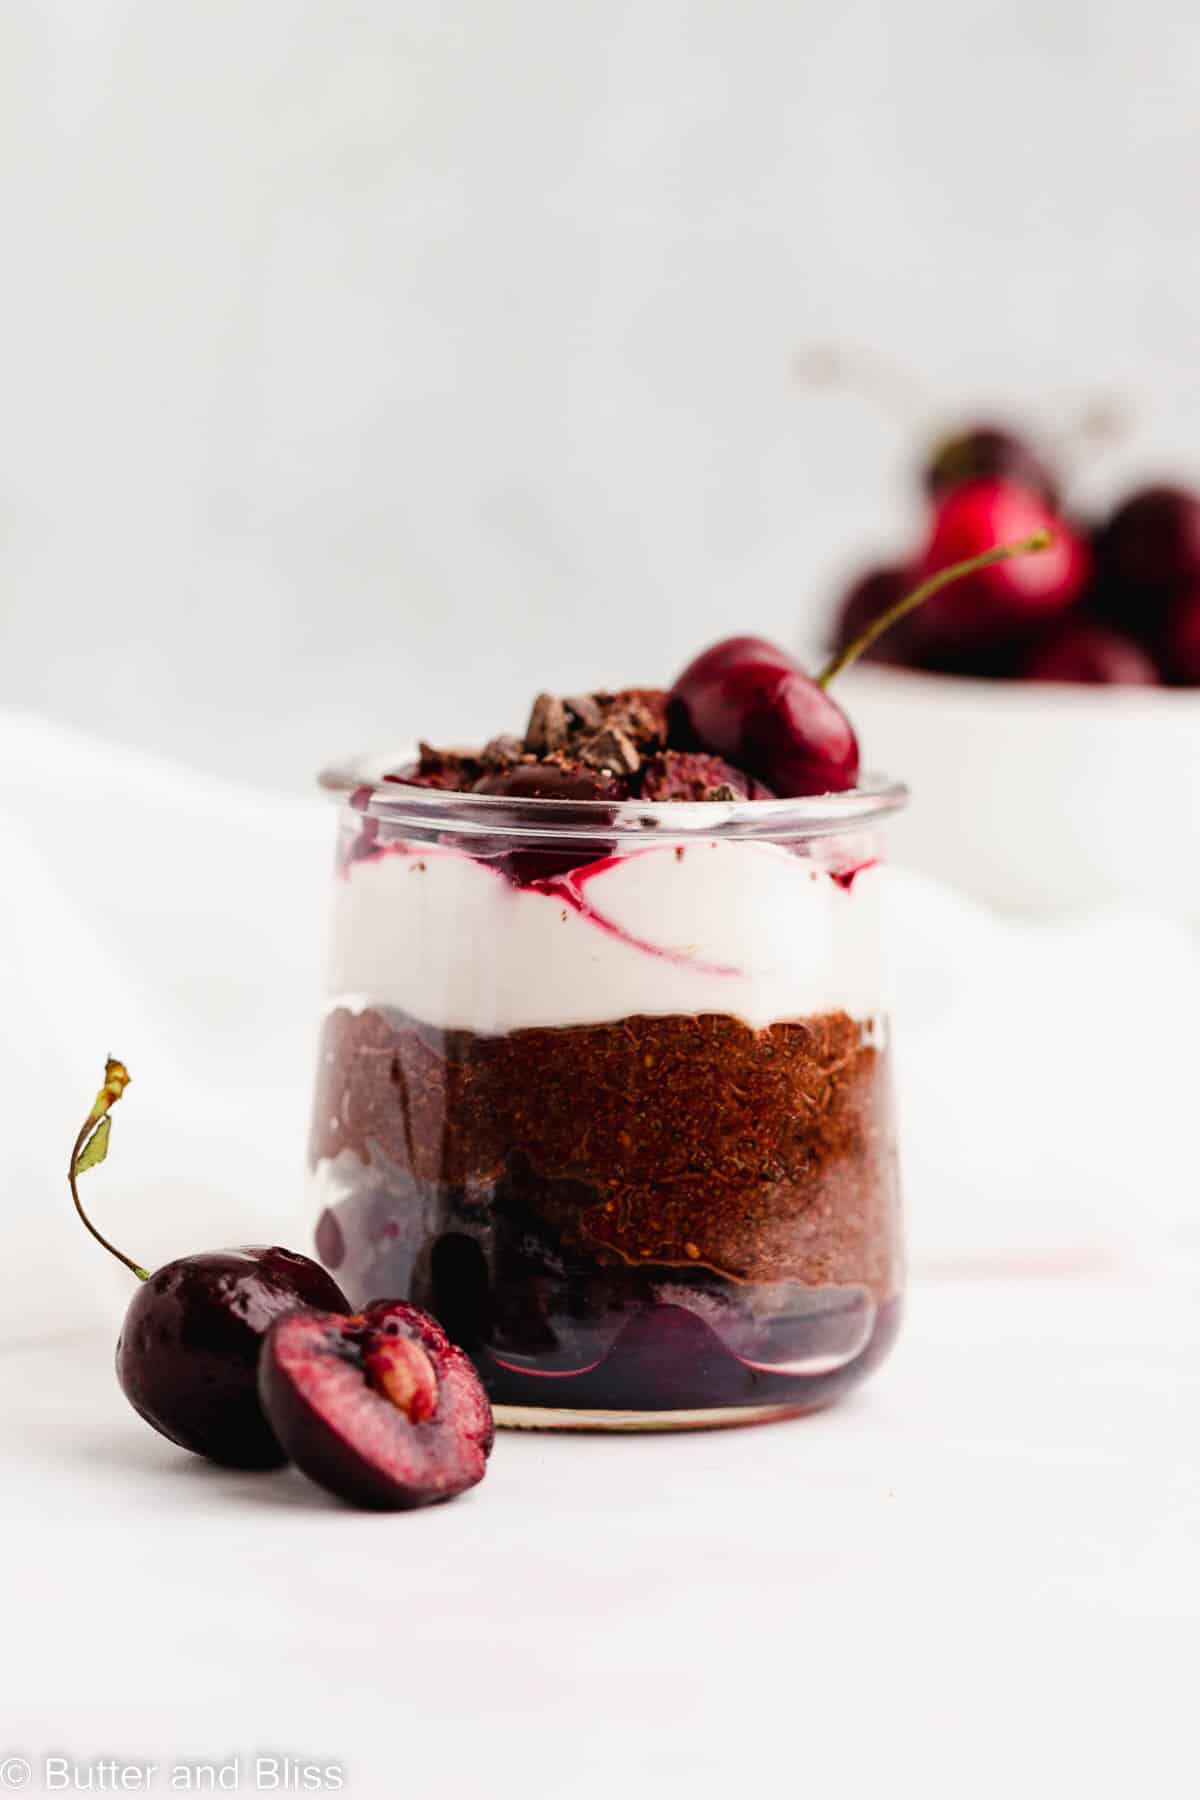 Single serving of healthier chocolate pudding with fresh cherry on top